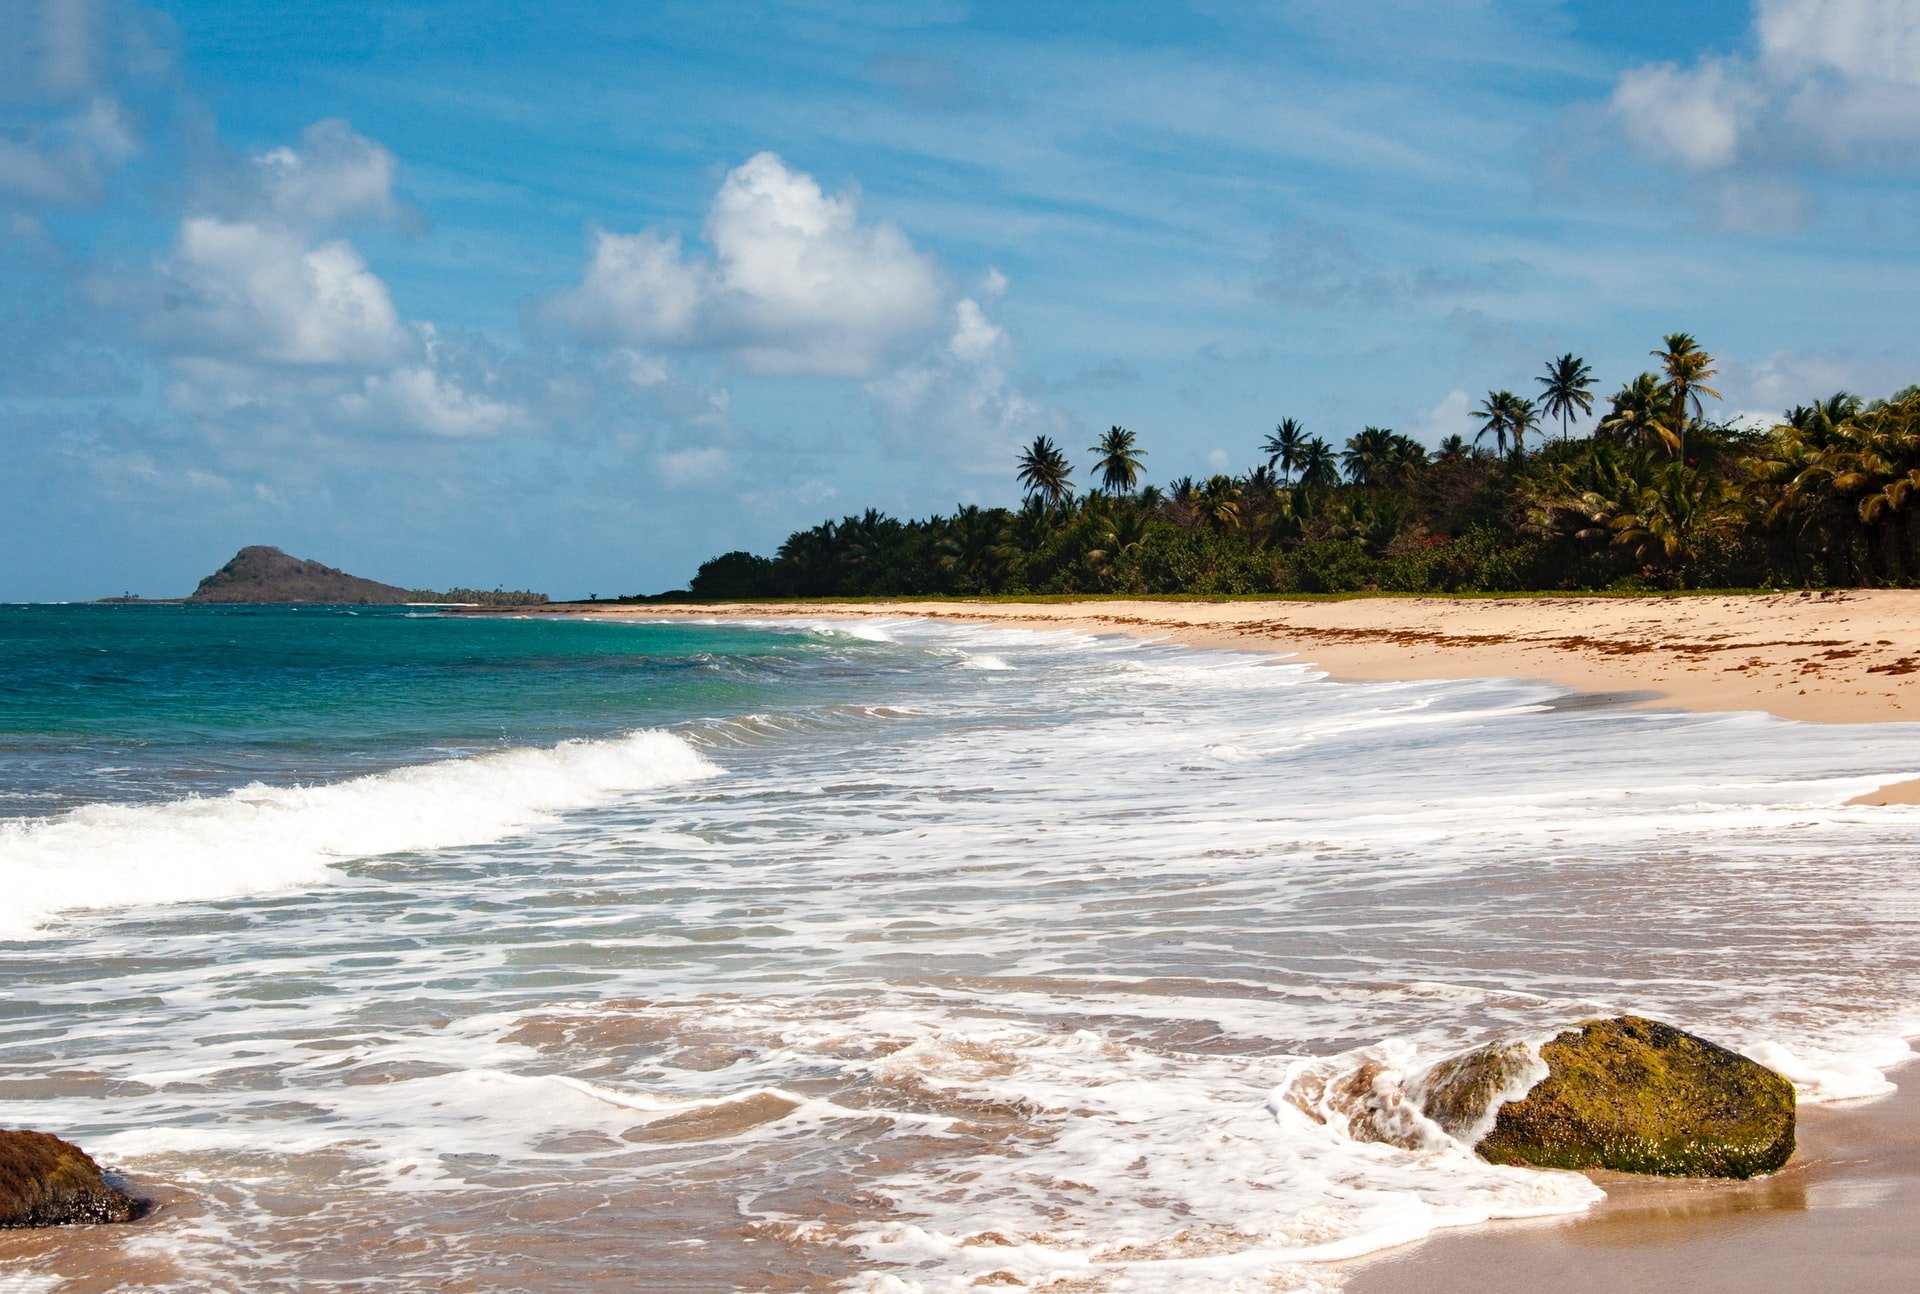 Grenada is known for lush forests and beautiful beaches. Surely a tempting investment destination!